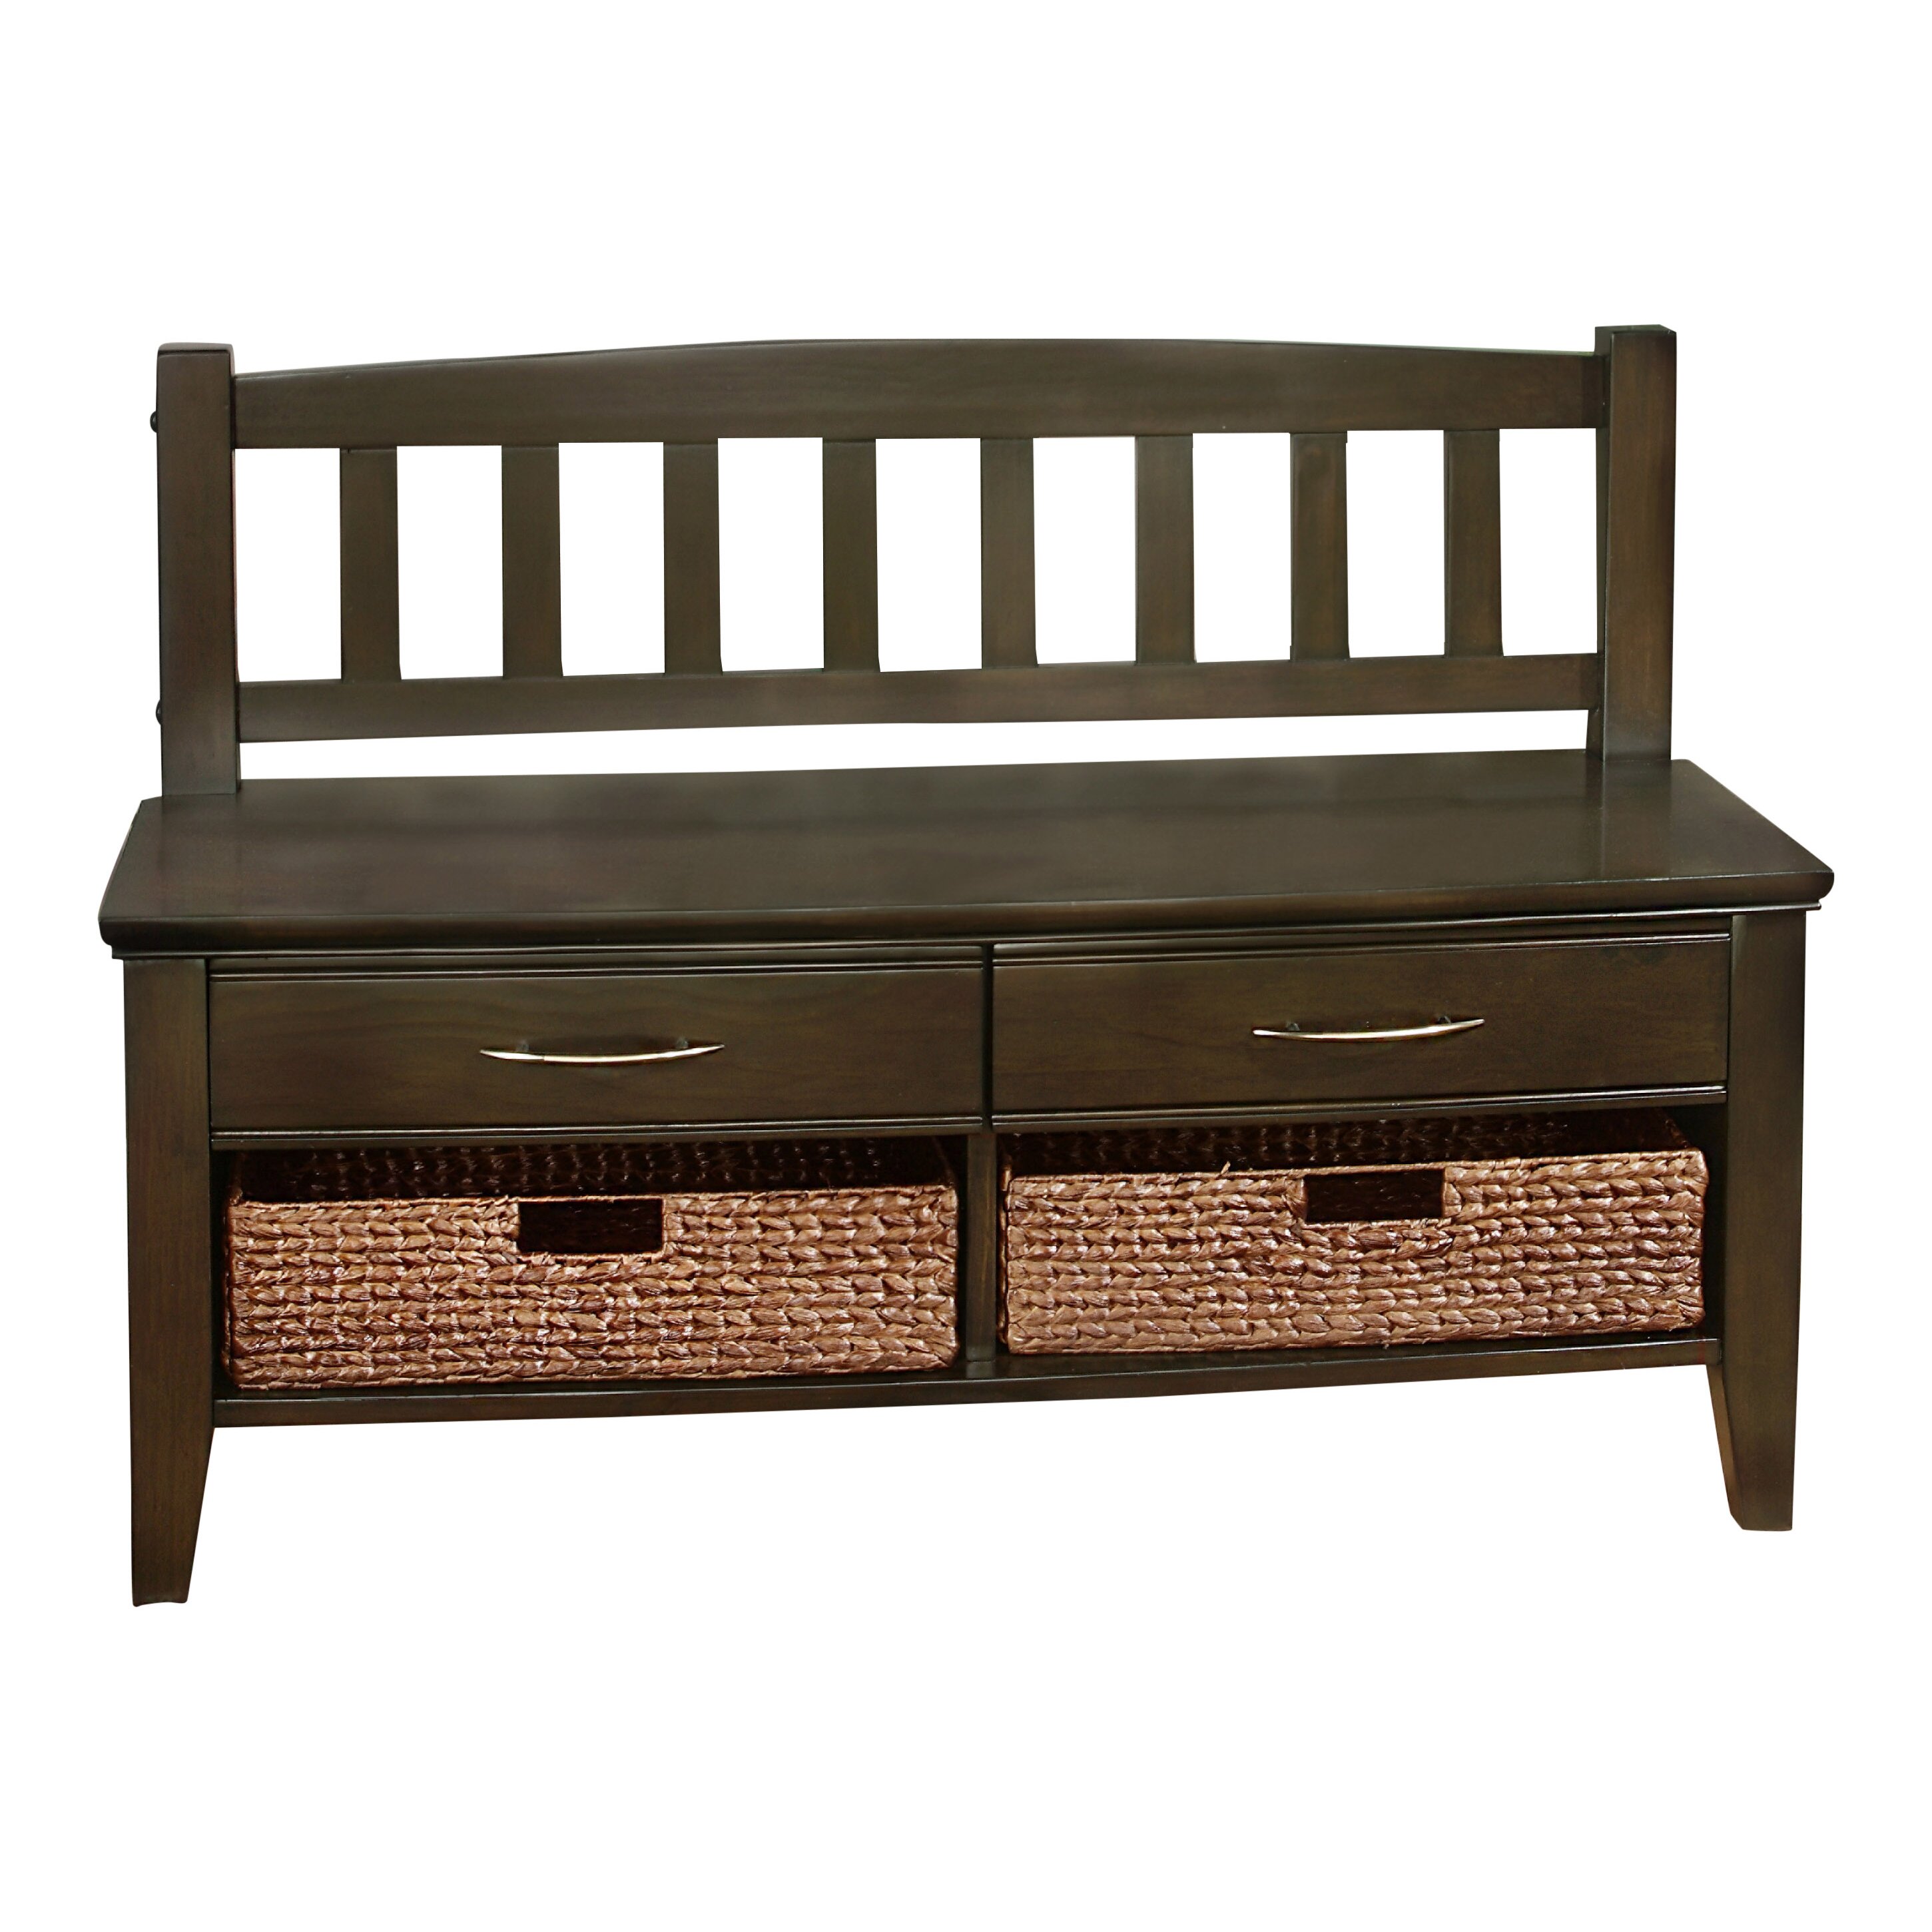 Simpli Home Williamsburg Wood Storage Entryway Bench with Drawers and